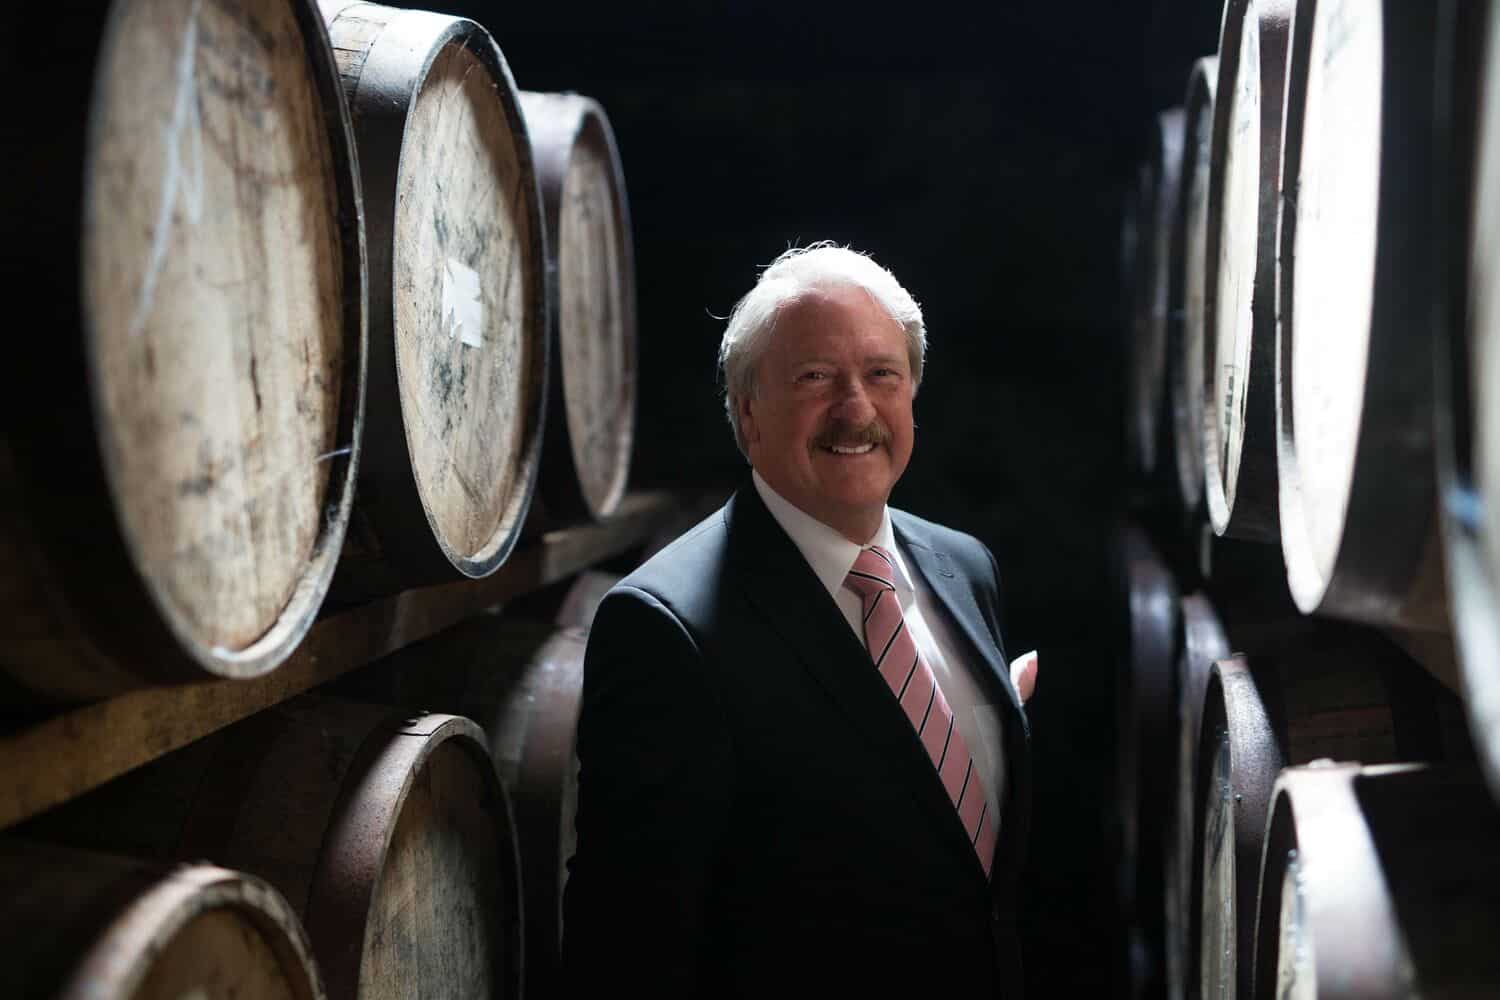 Richard Paterson celebrates 50 years ahead of once-in-a-lifetime whisky release